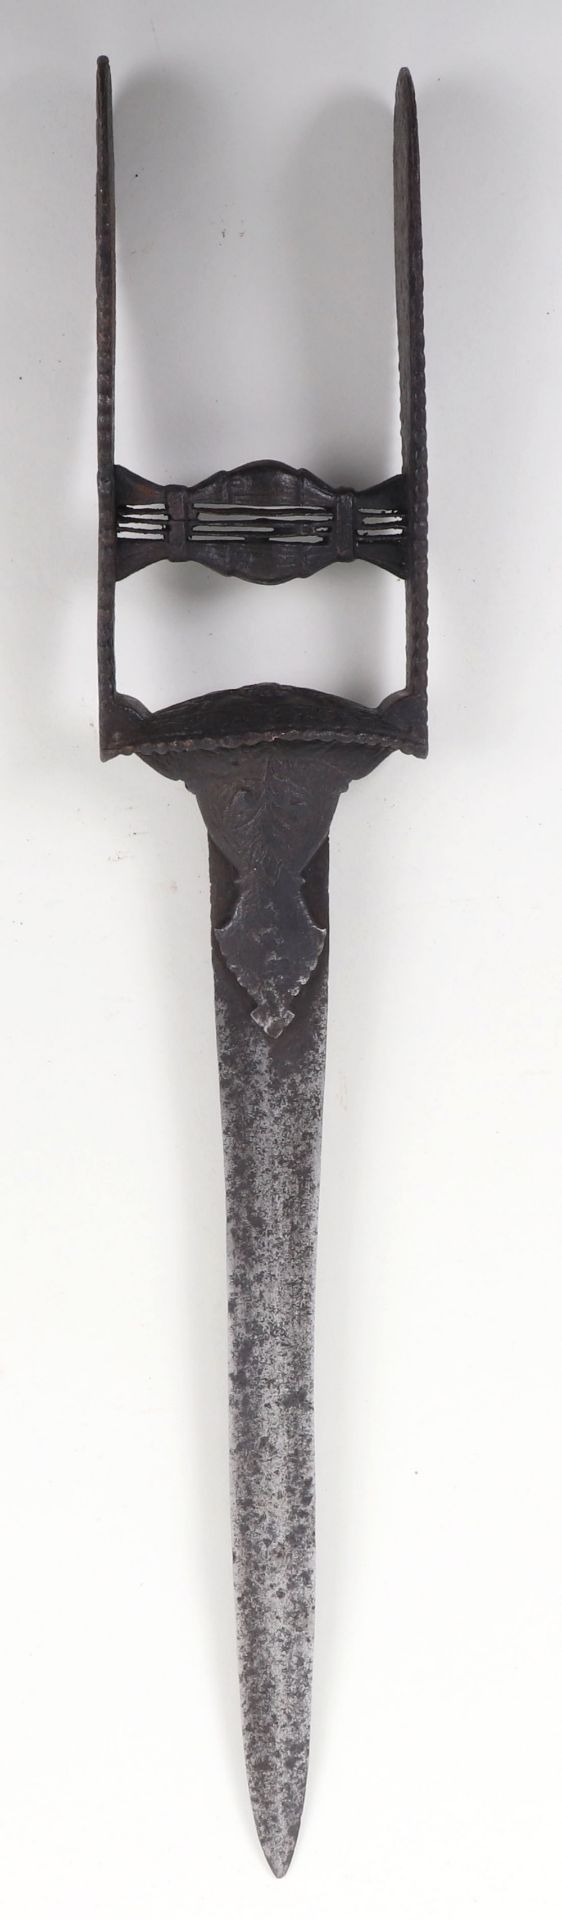 Indian Iron Katar of Tanjore Armoury Type, 17th Century - Image 2 of 10